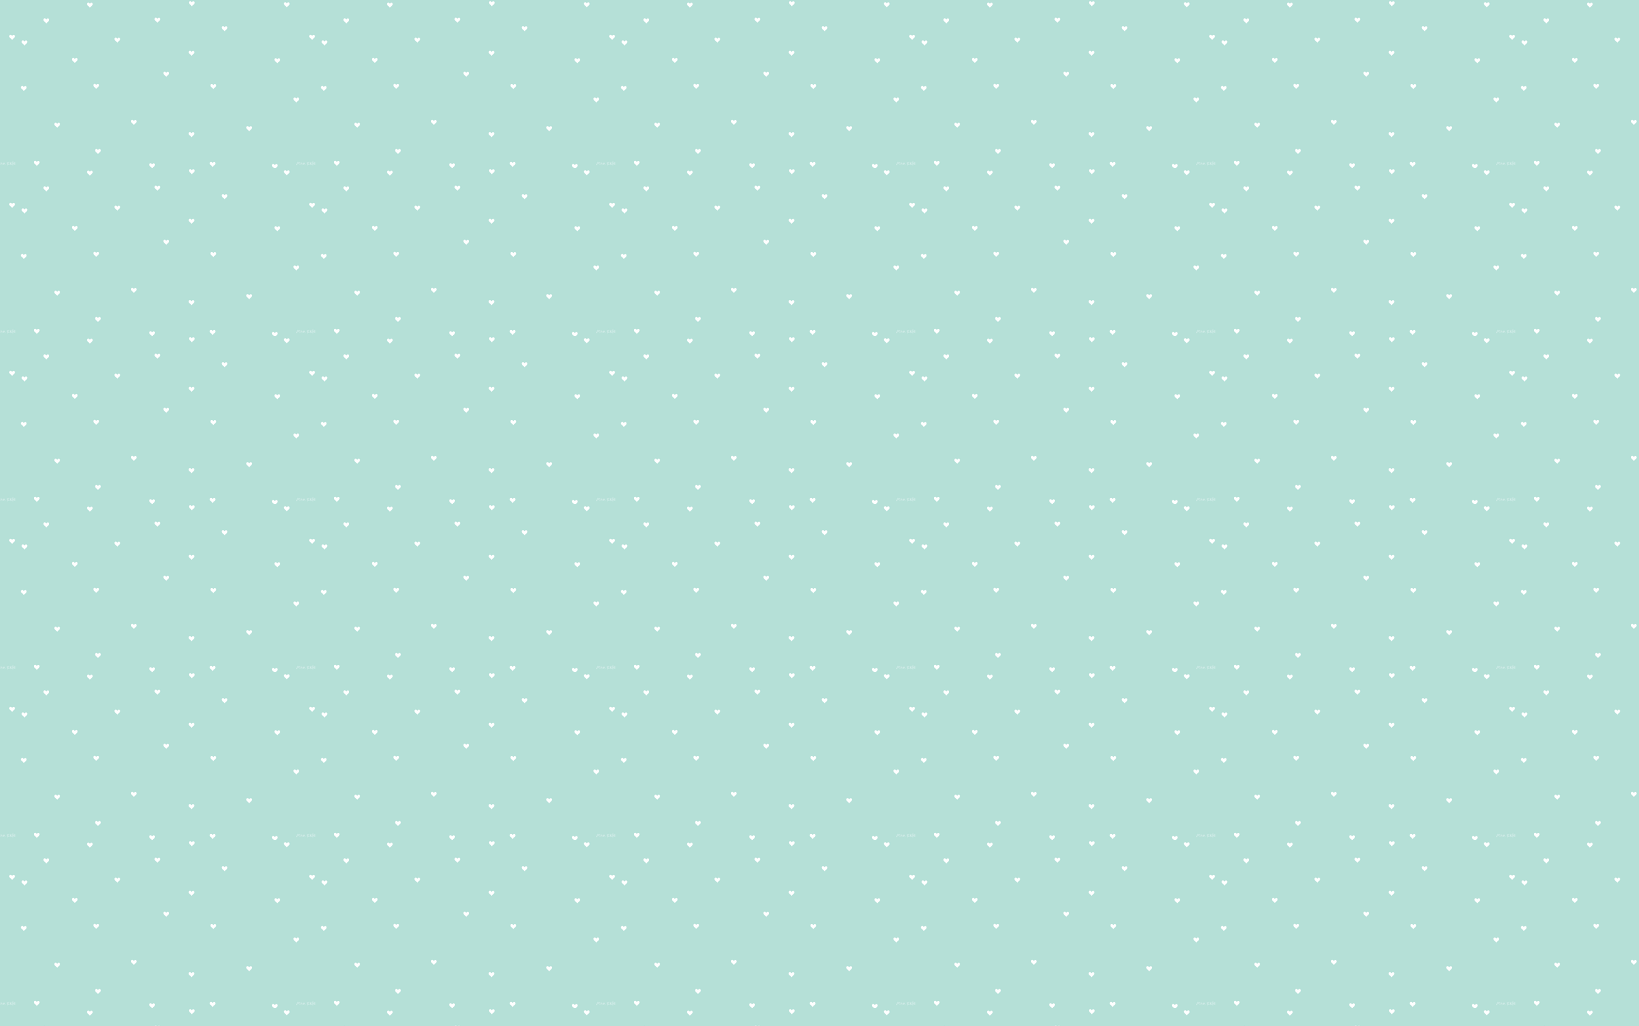 A light blue background with white dots - Cute